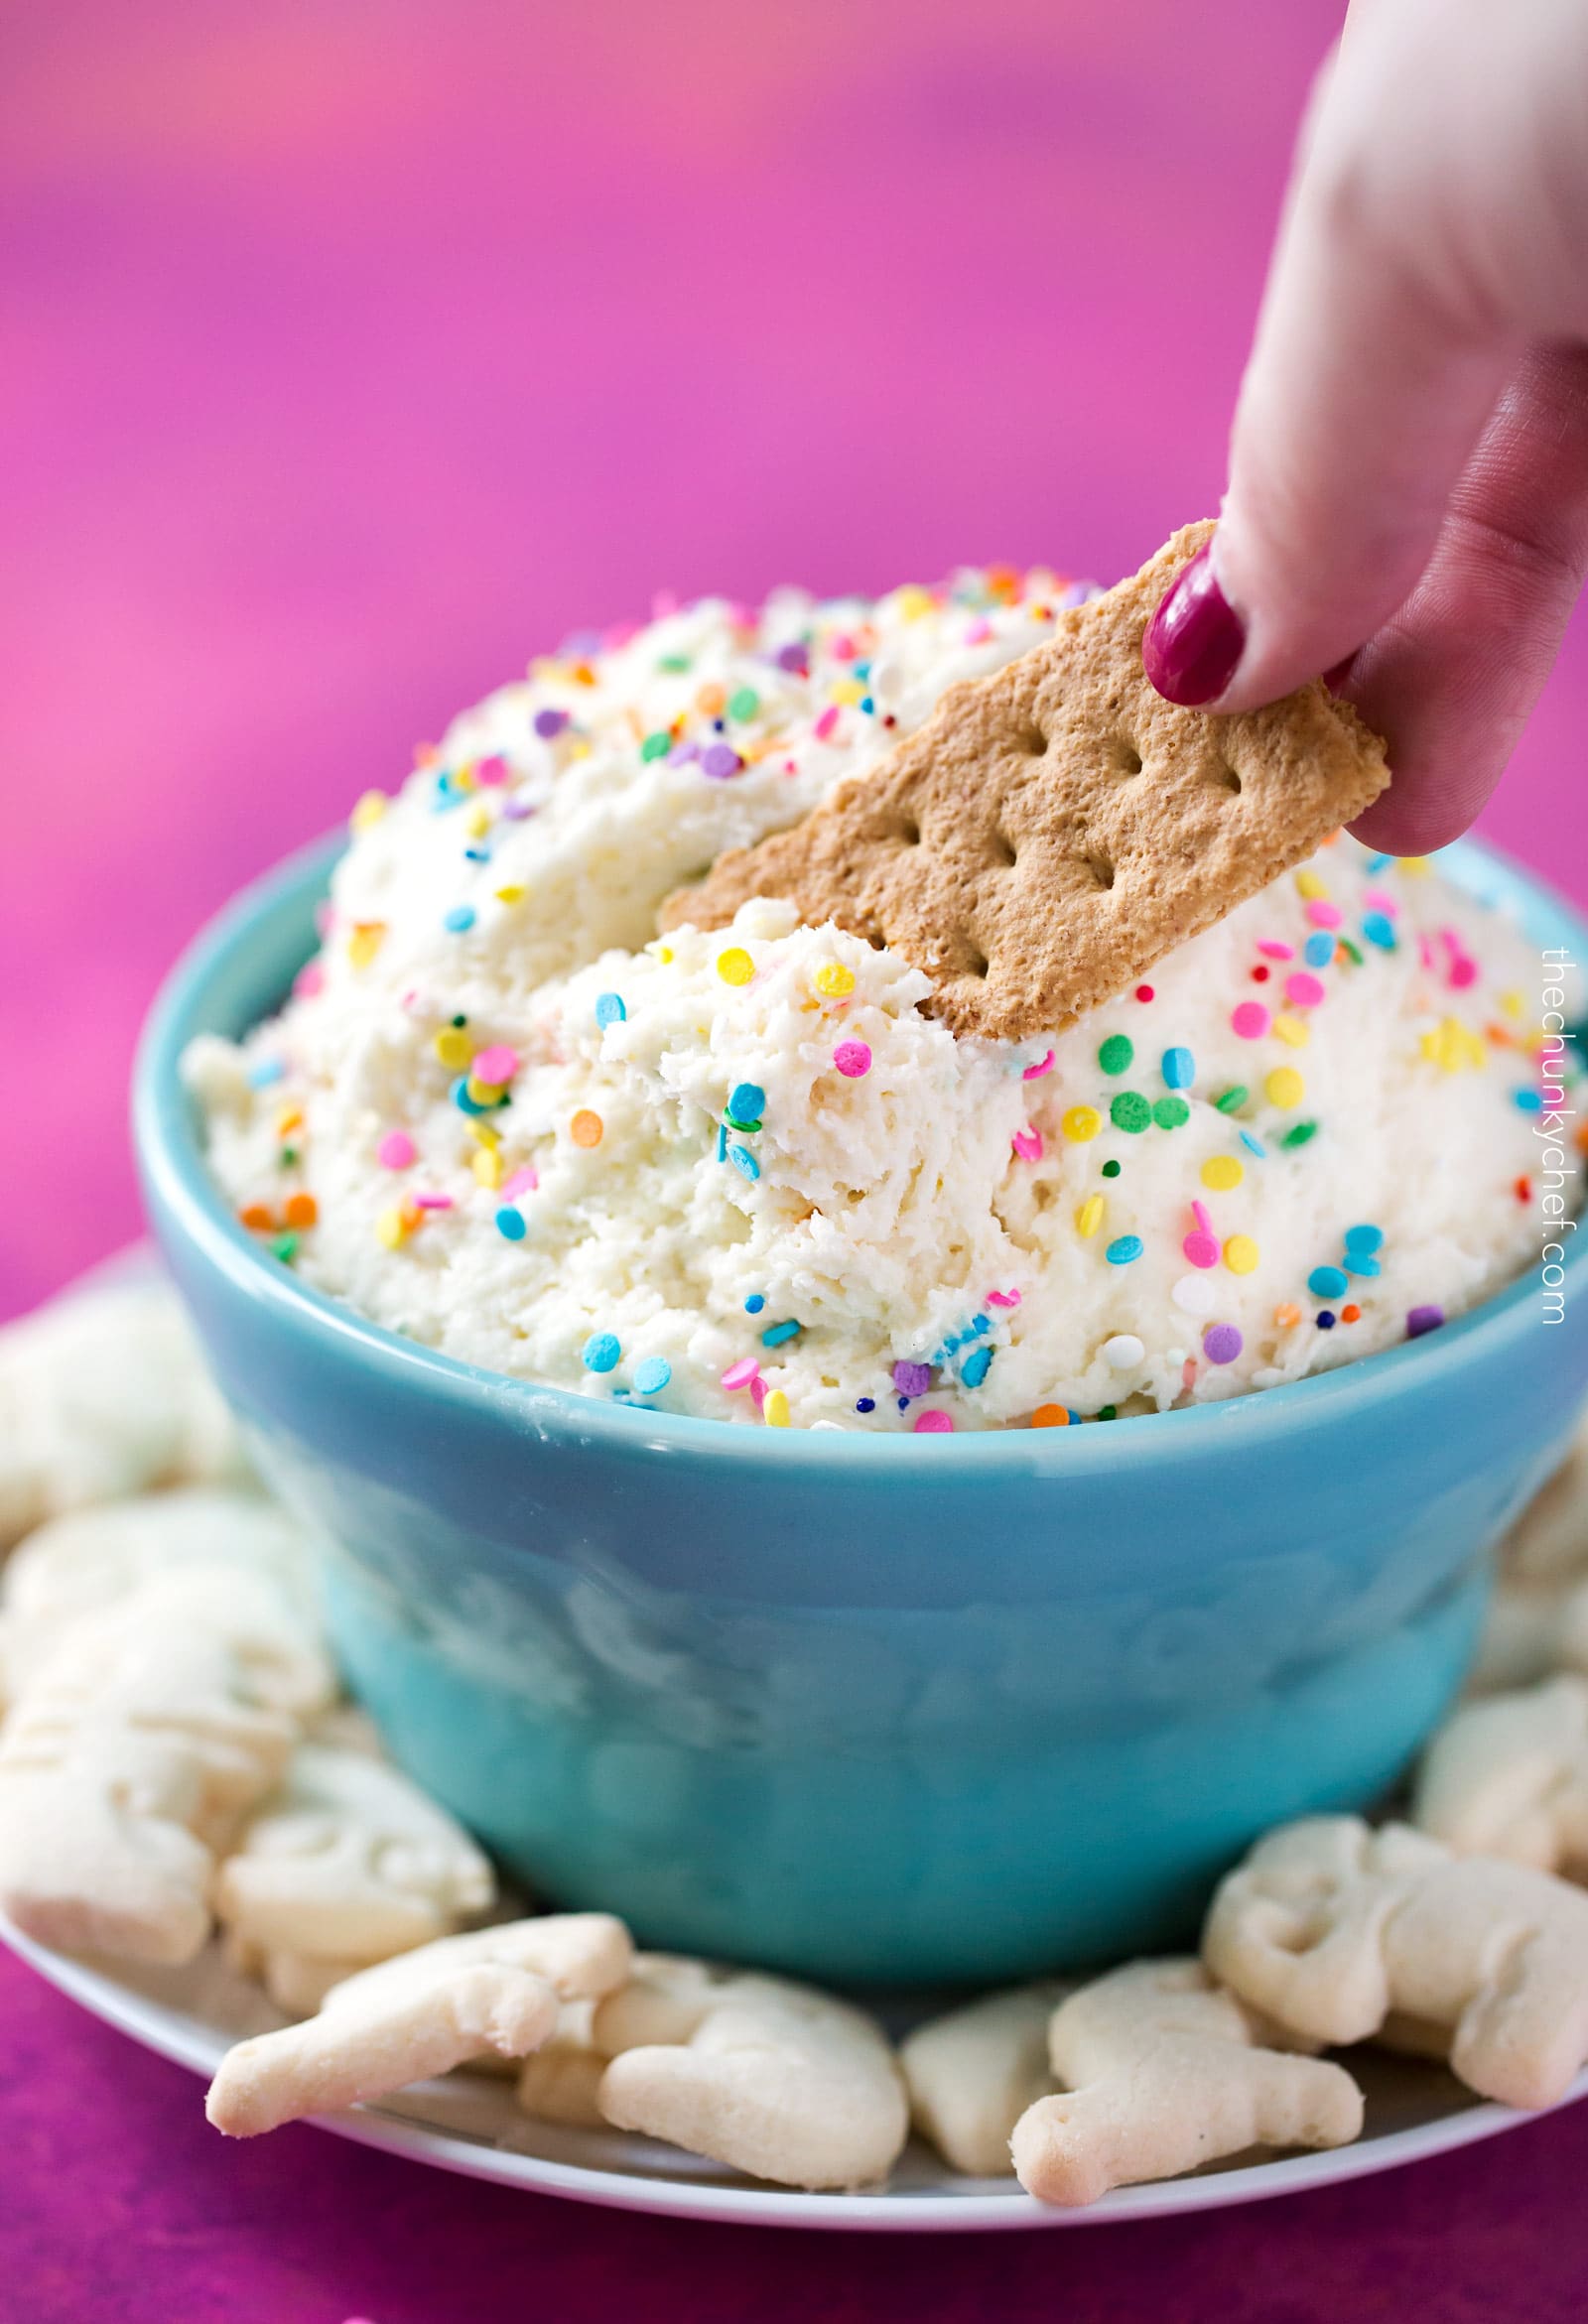 Four Ingredient Funfetti Cake Batter Dip | This dessert dip uses only 4 ingredients, is no bake, and tastes exactly like cake batter! Both kids and adults alike will love this funfetti treat! | http://thechunkychef.com